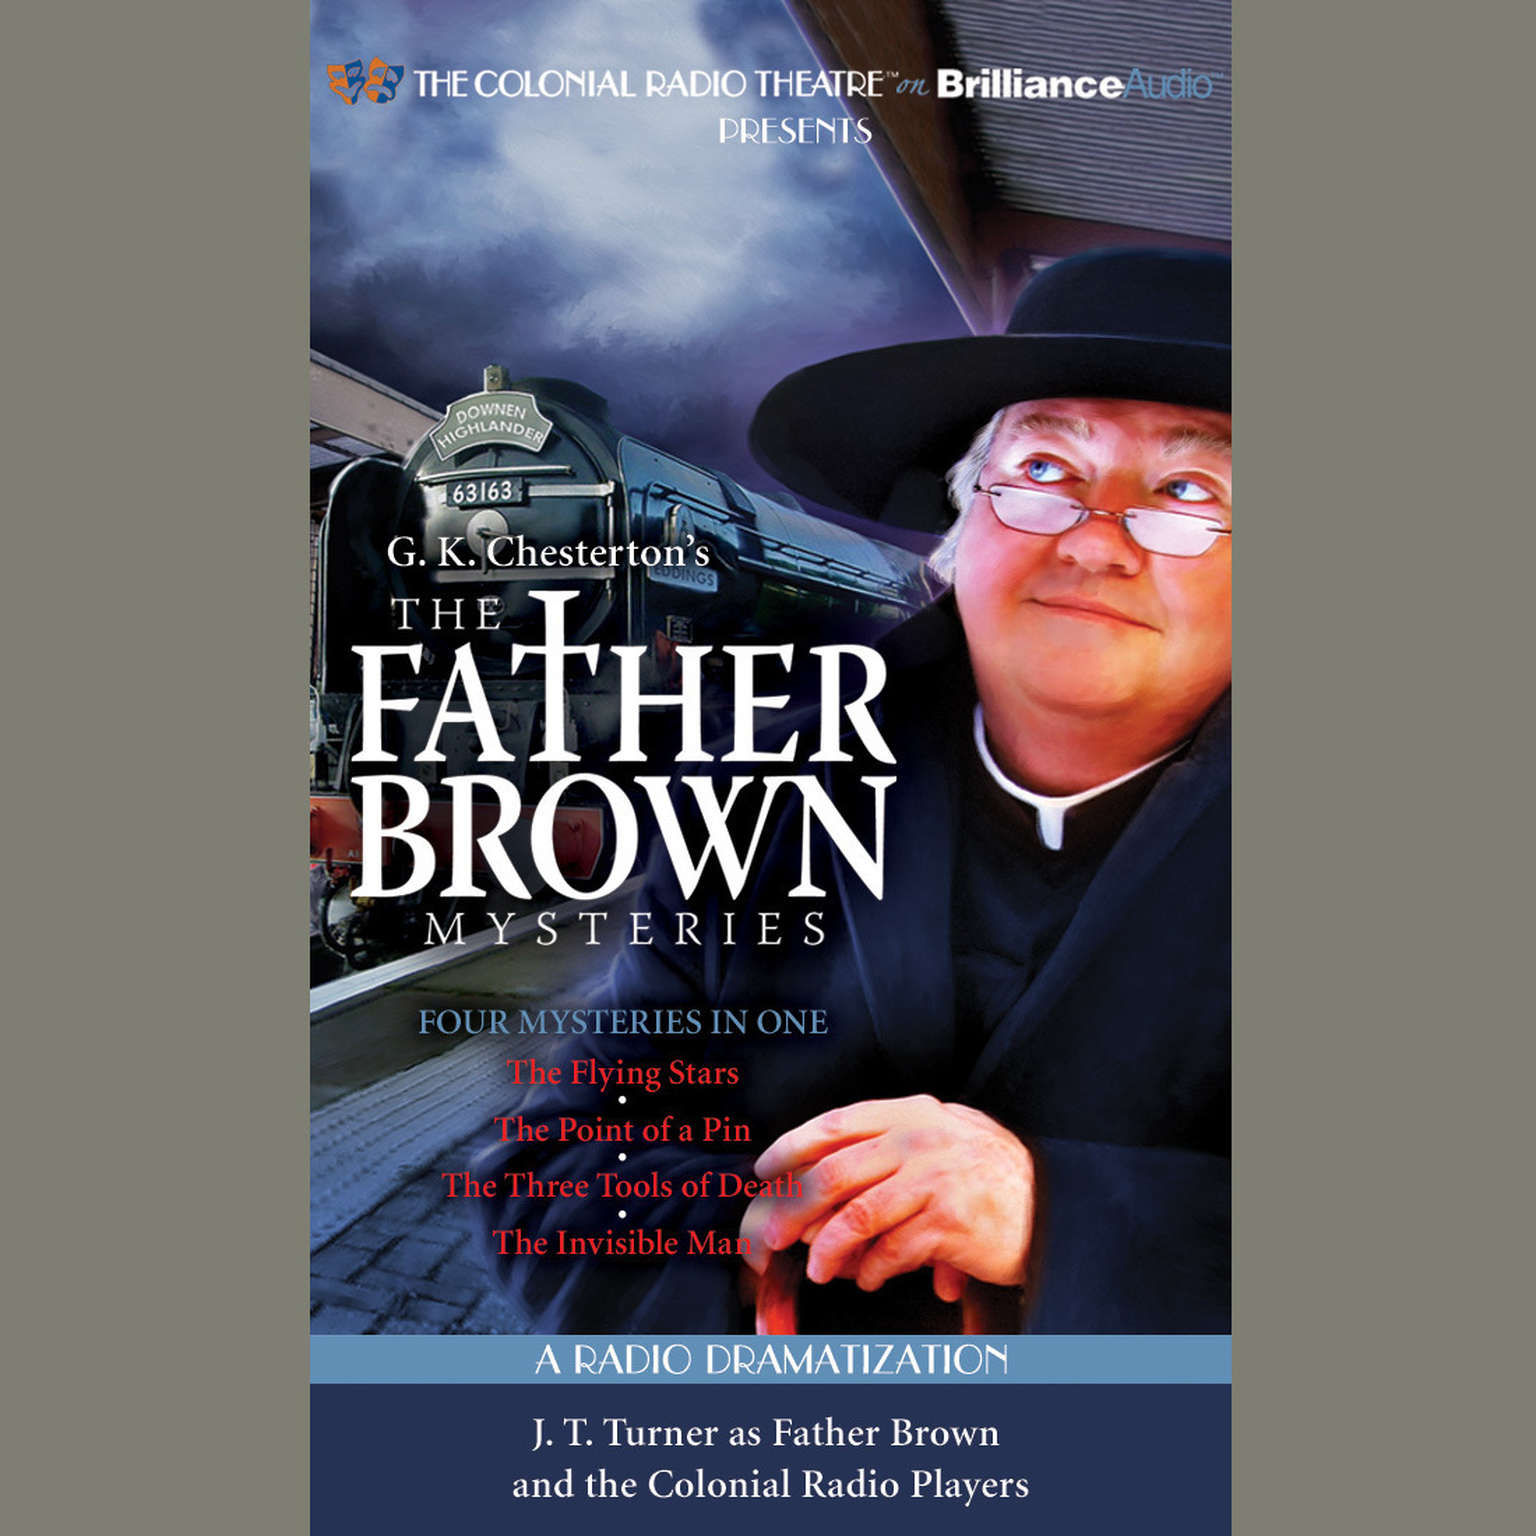 Father Brown Mysteries, The - The Flying Stars, The Point of a Pin, The Three Tools of Death, and The Invisible Man: A Radio Dramatization Audiobook, by G. K. Chesterton